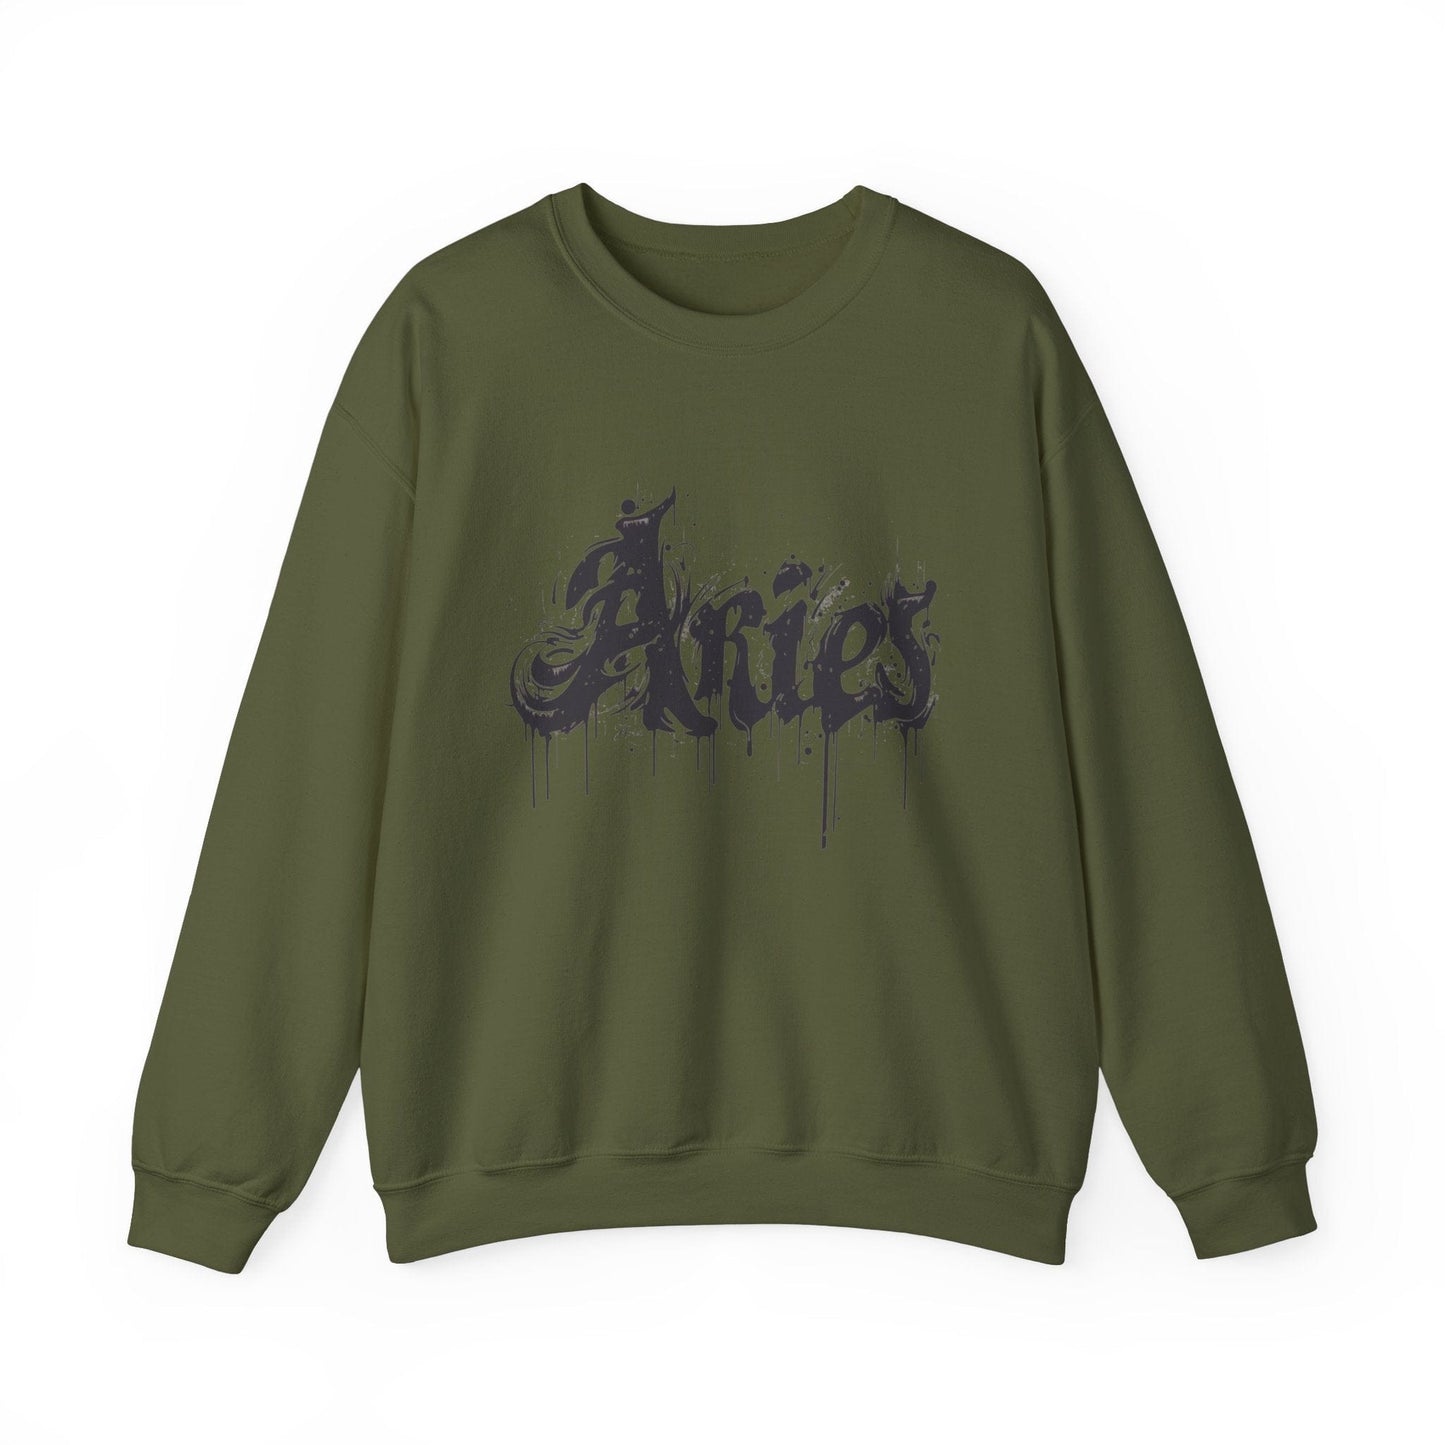 Sweatshirt S / Military Green Ink-Dripped Aries Energy Soft Sweater: Embrace Your Fire